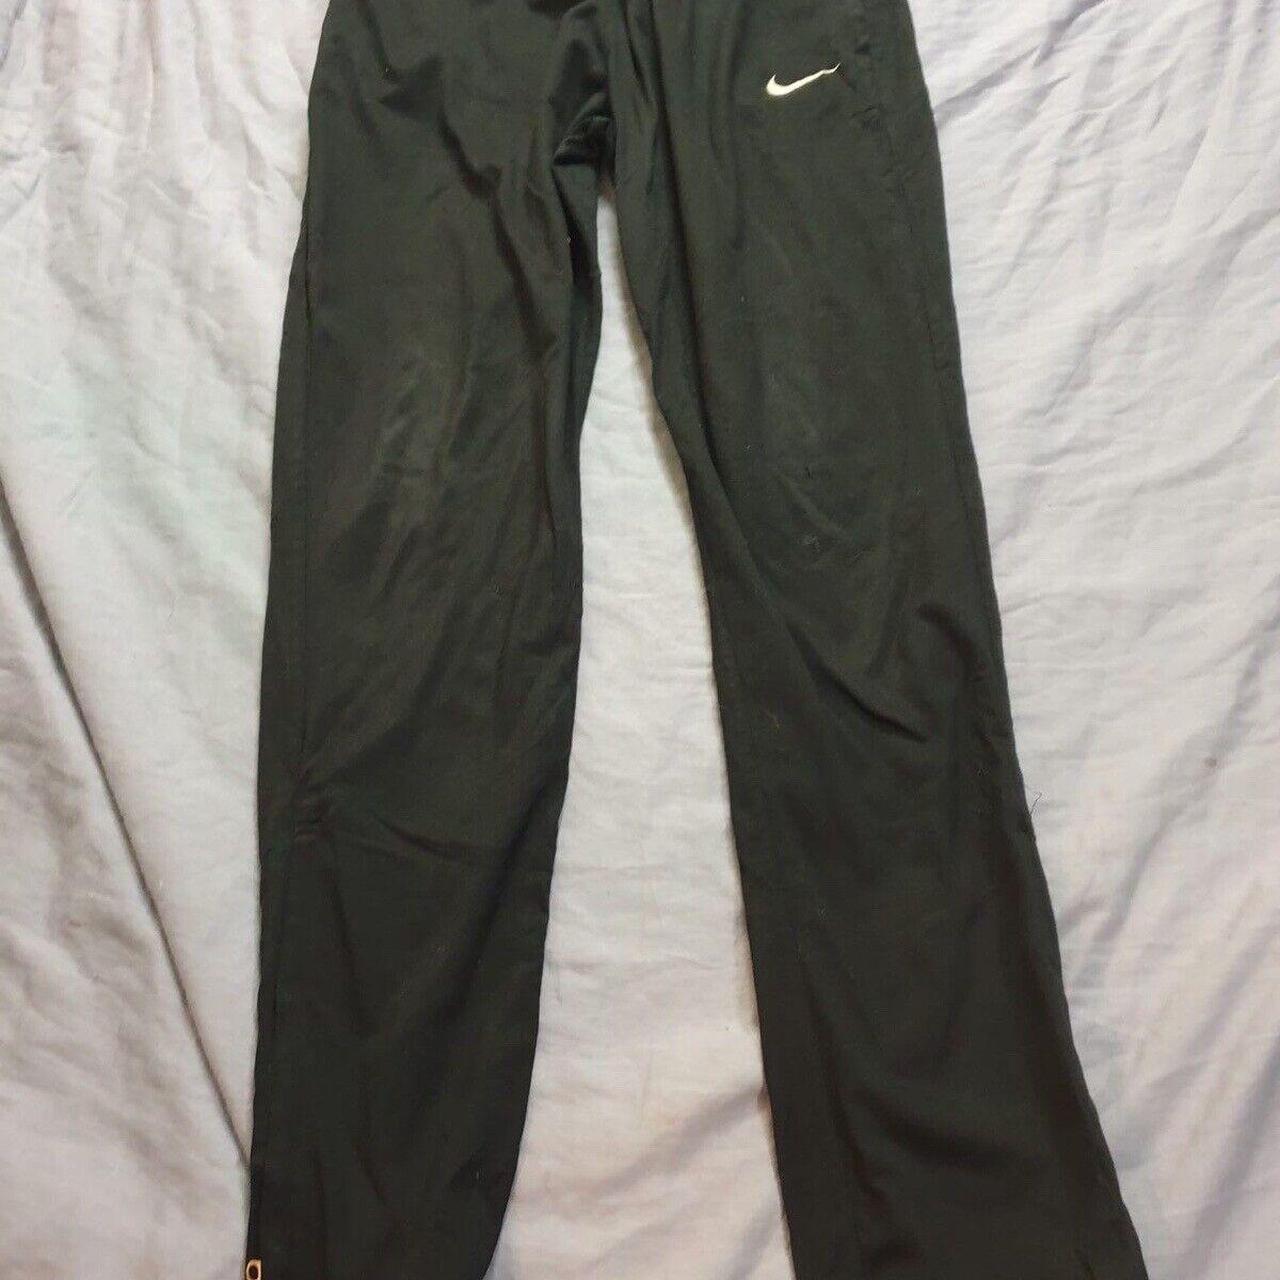 Nike leggings for women size small Excellent condition - Depop